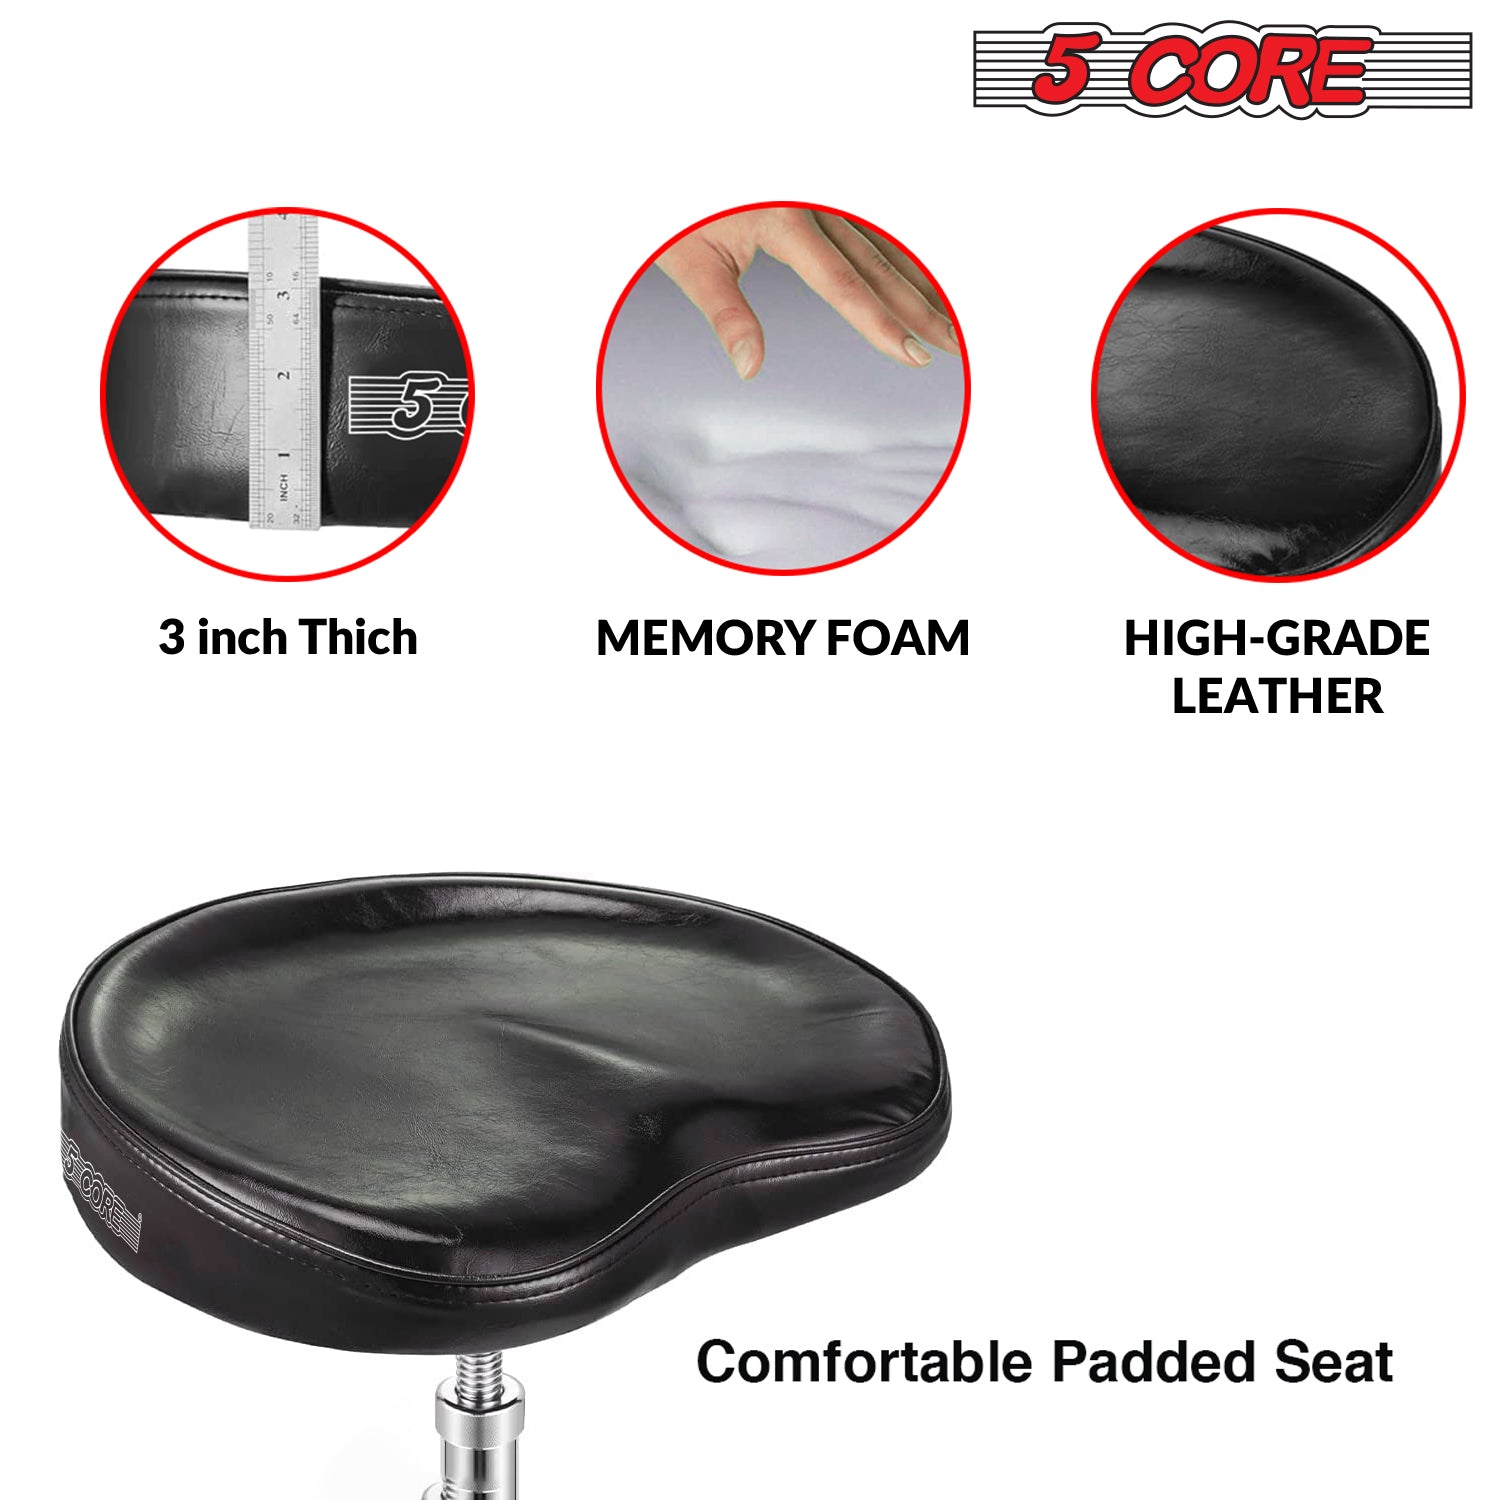 5 Core Studio Throne: Padded music stool with adjustable height for studio sessions.